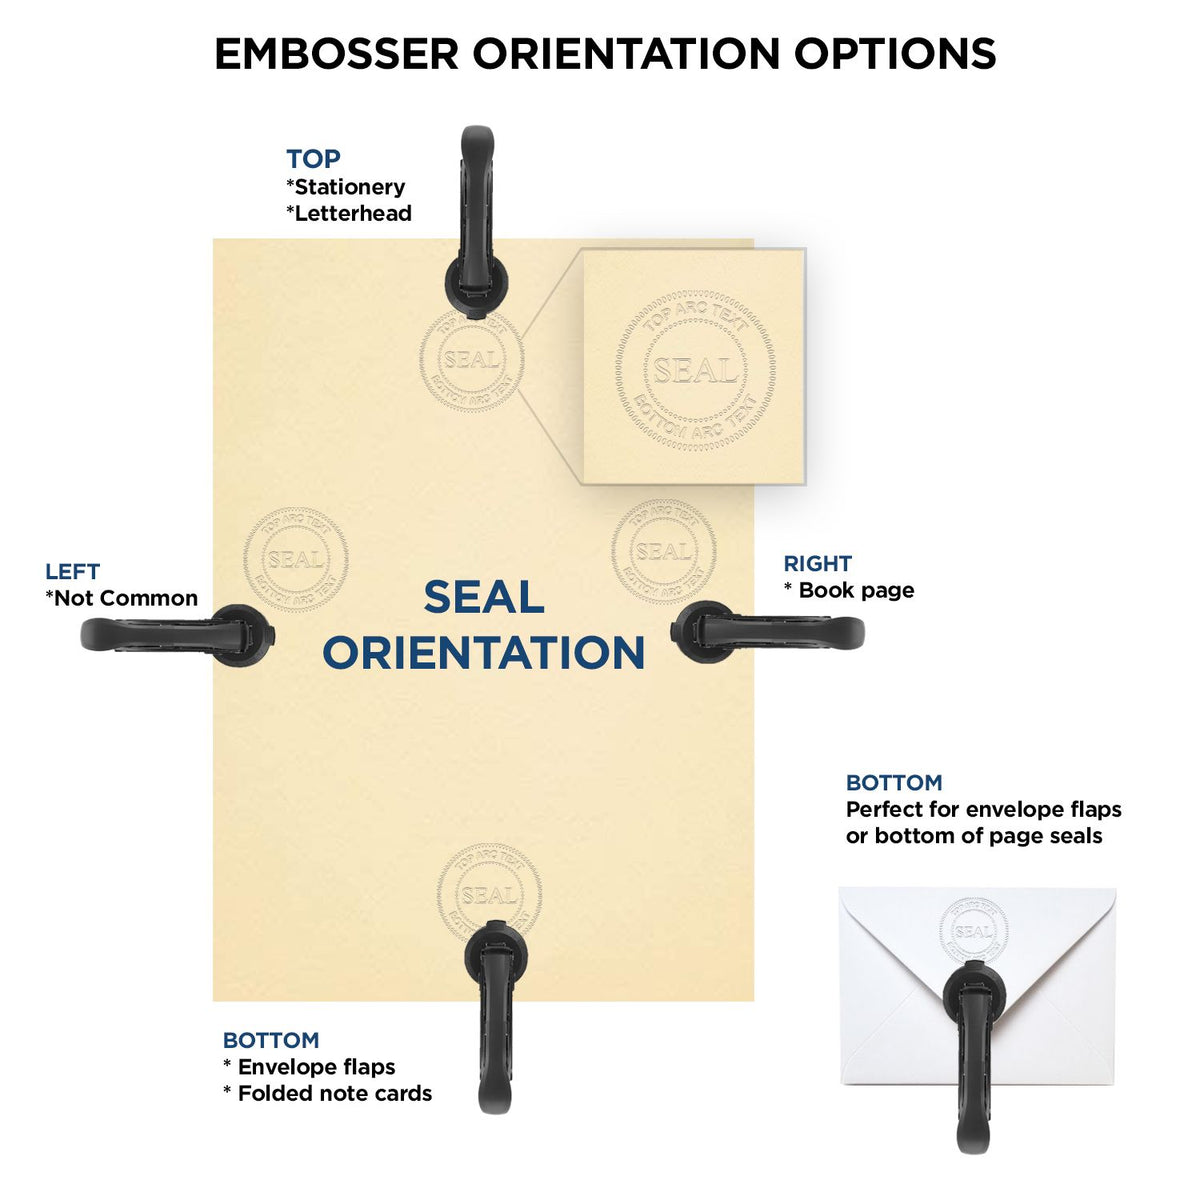 An infographic for the Gift Nevada Land Surveyor Seal showing embosser orientation, this is showing examples of a top, bottom, right and left insert.